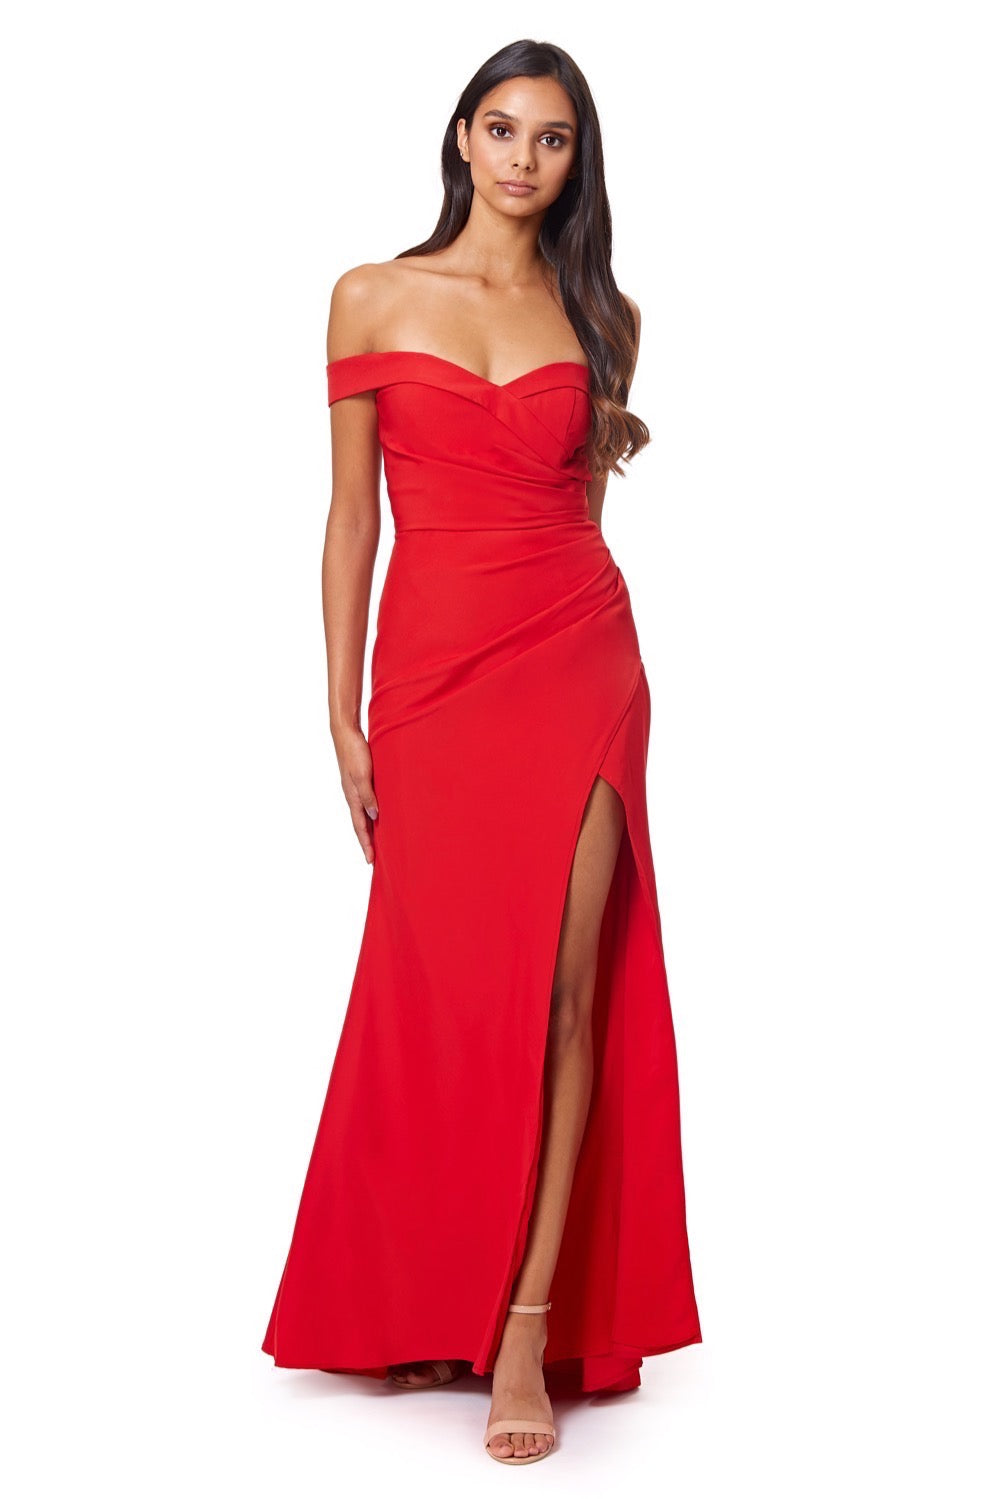 Bluebell Bardot Maxi Dress With Thigh Split And Button Back, UK 8 / US 4 / EU 36 / Red